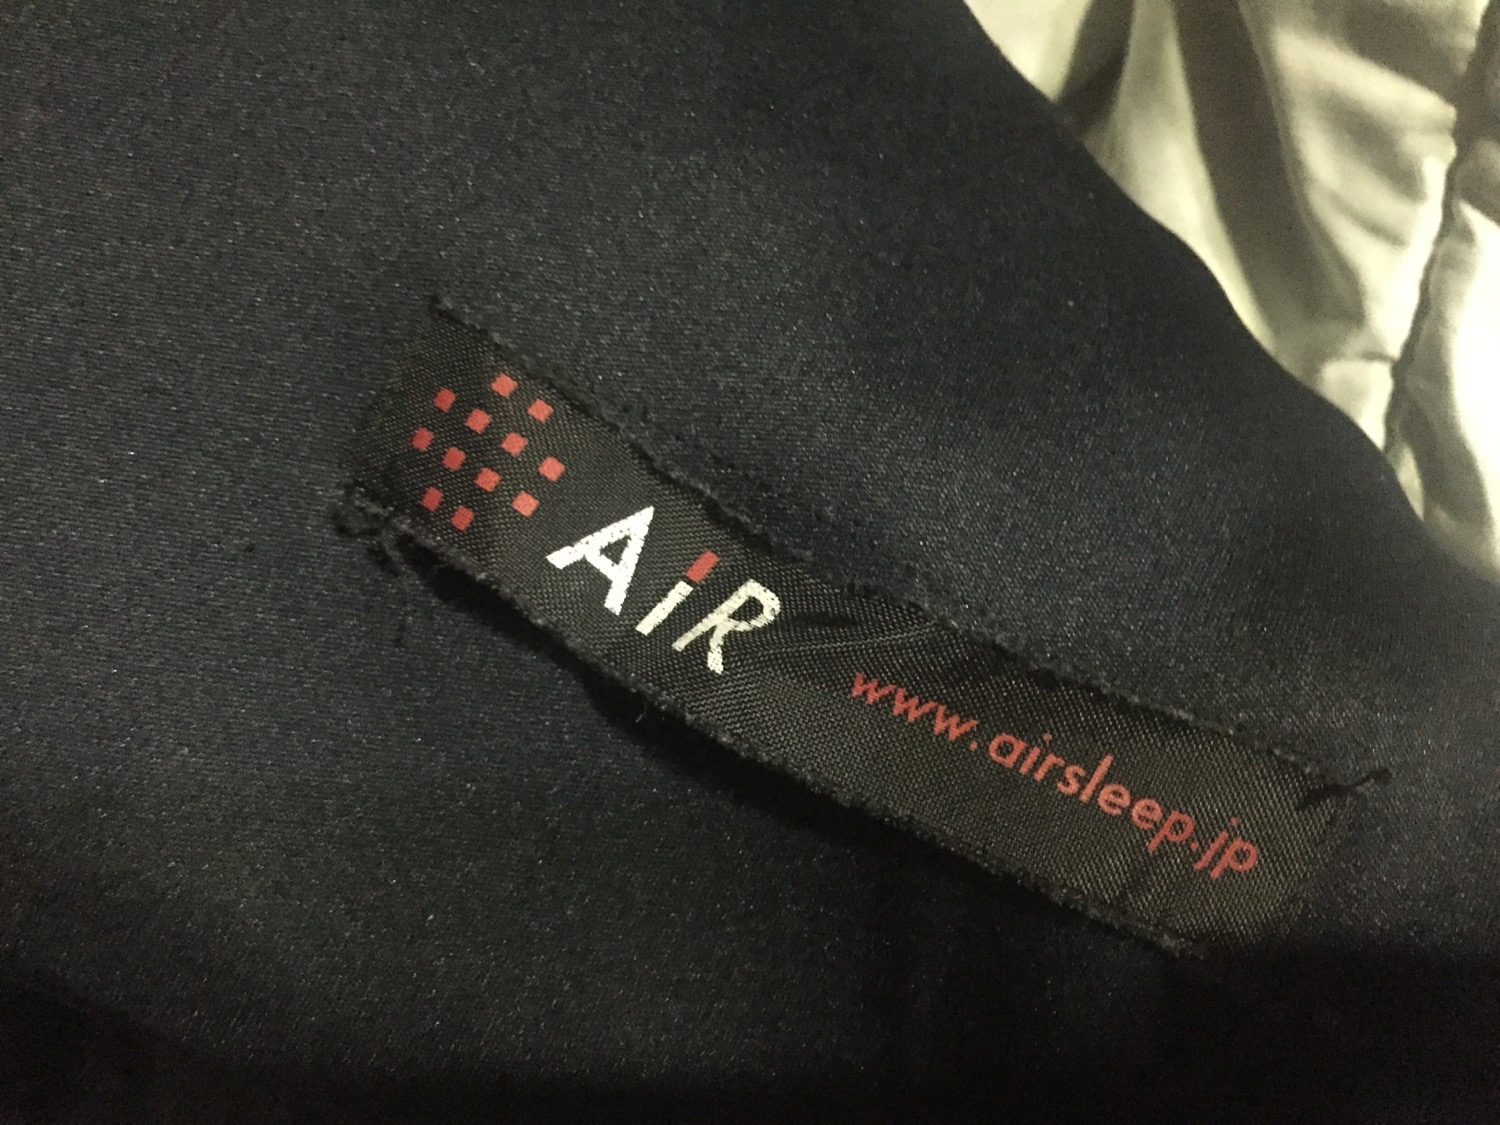 a black fabric with white text and red letters on it